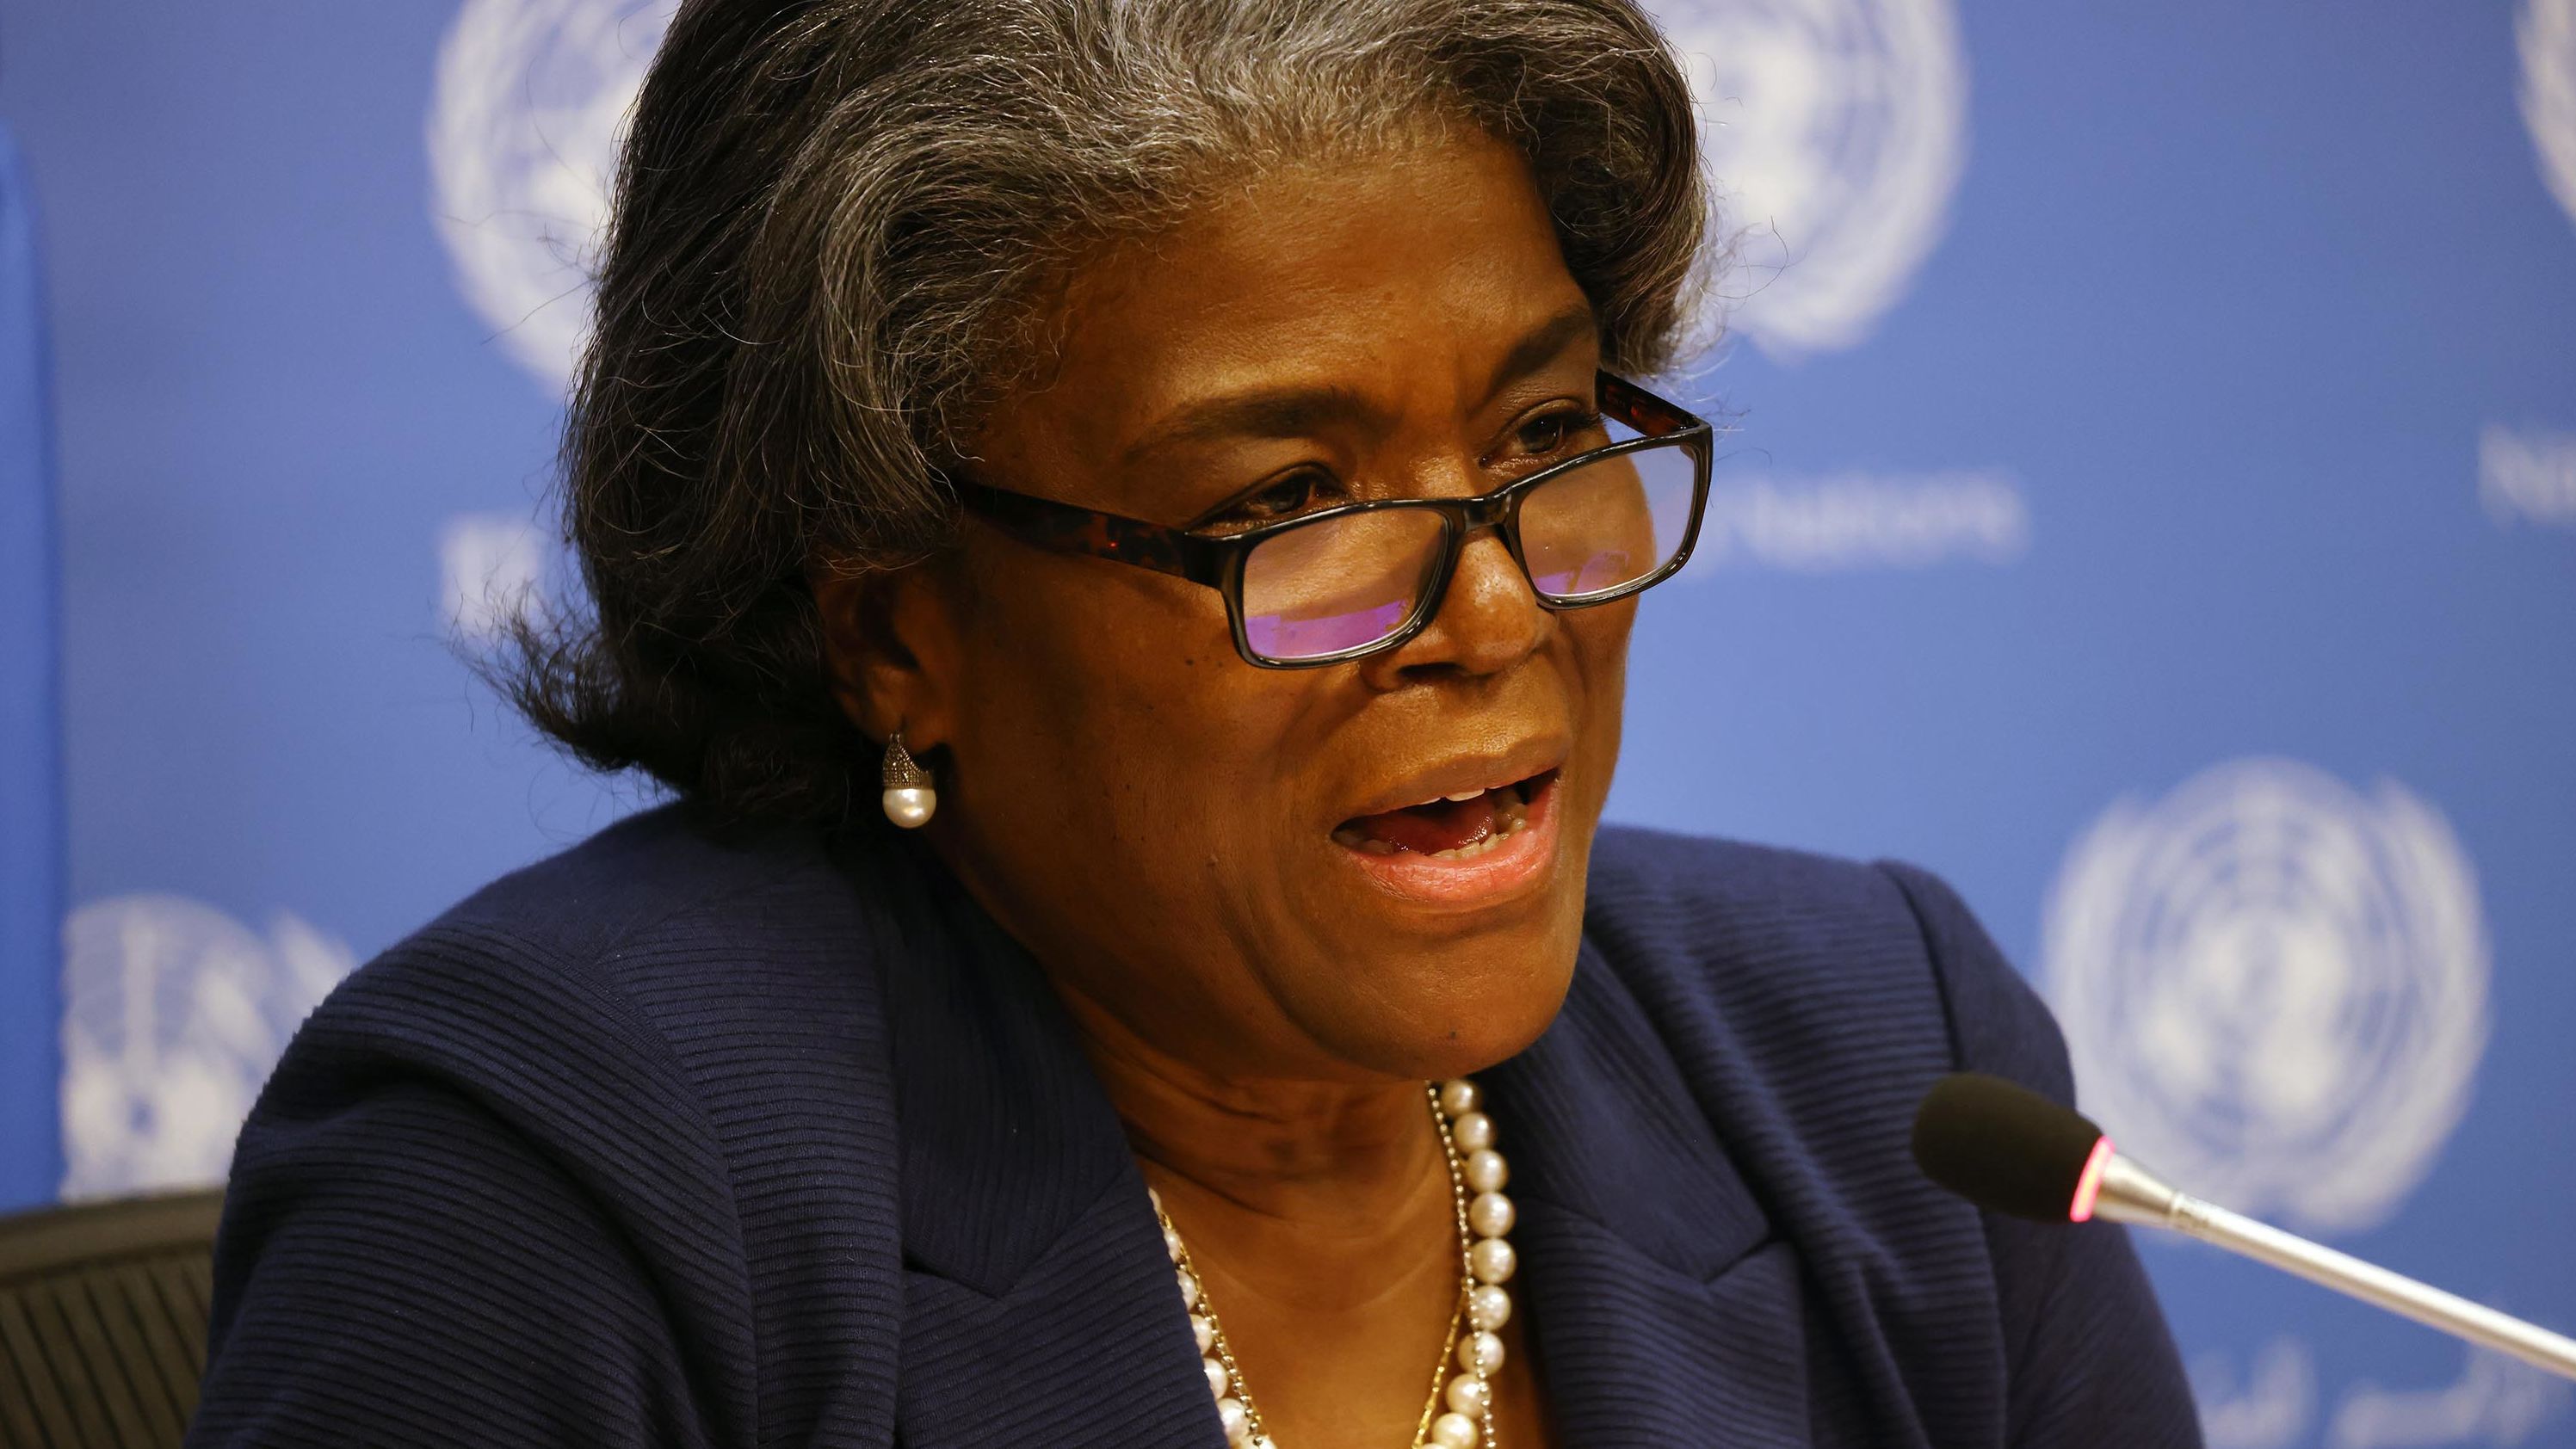 Linda Thomas-Greenfield, the new US Ambassador to the United Nations (UN), speaks to the media at a socially distanced briefing on March 01, 2021 in New York City. 